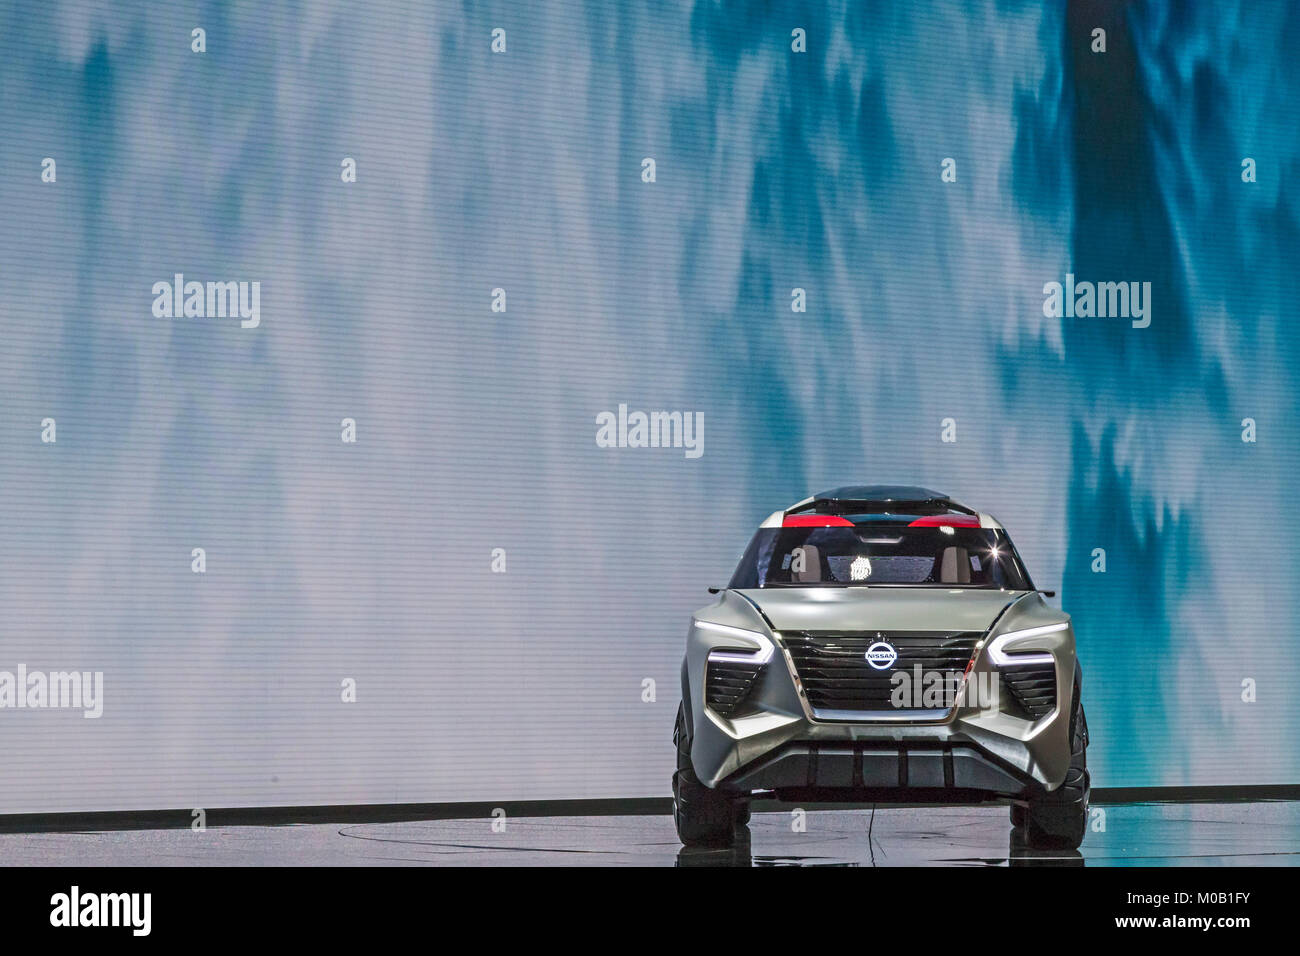 Detroit, Michigan - The Nissan X Motion, a concept car intended to be self-driving in the city, on display at the North American International Auto Sh Stock Photo